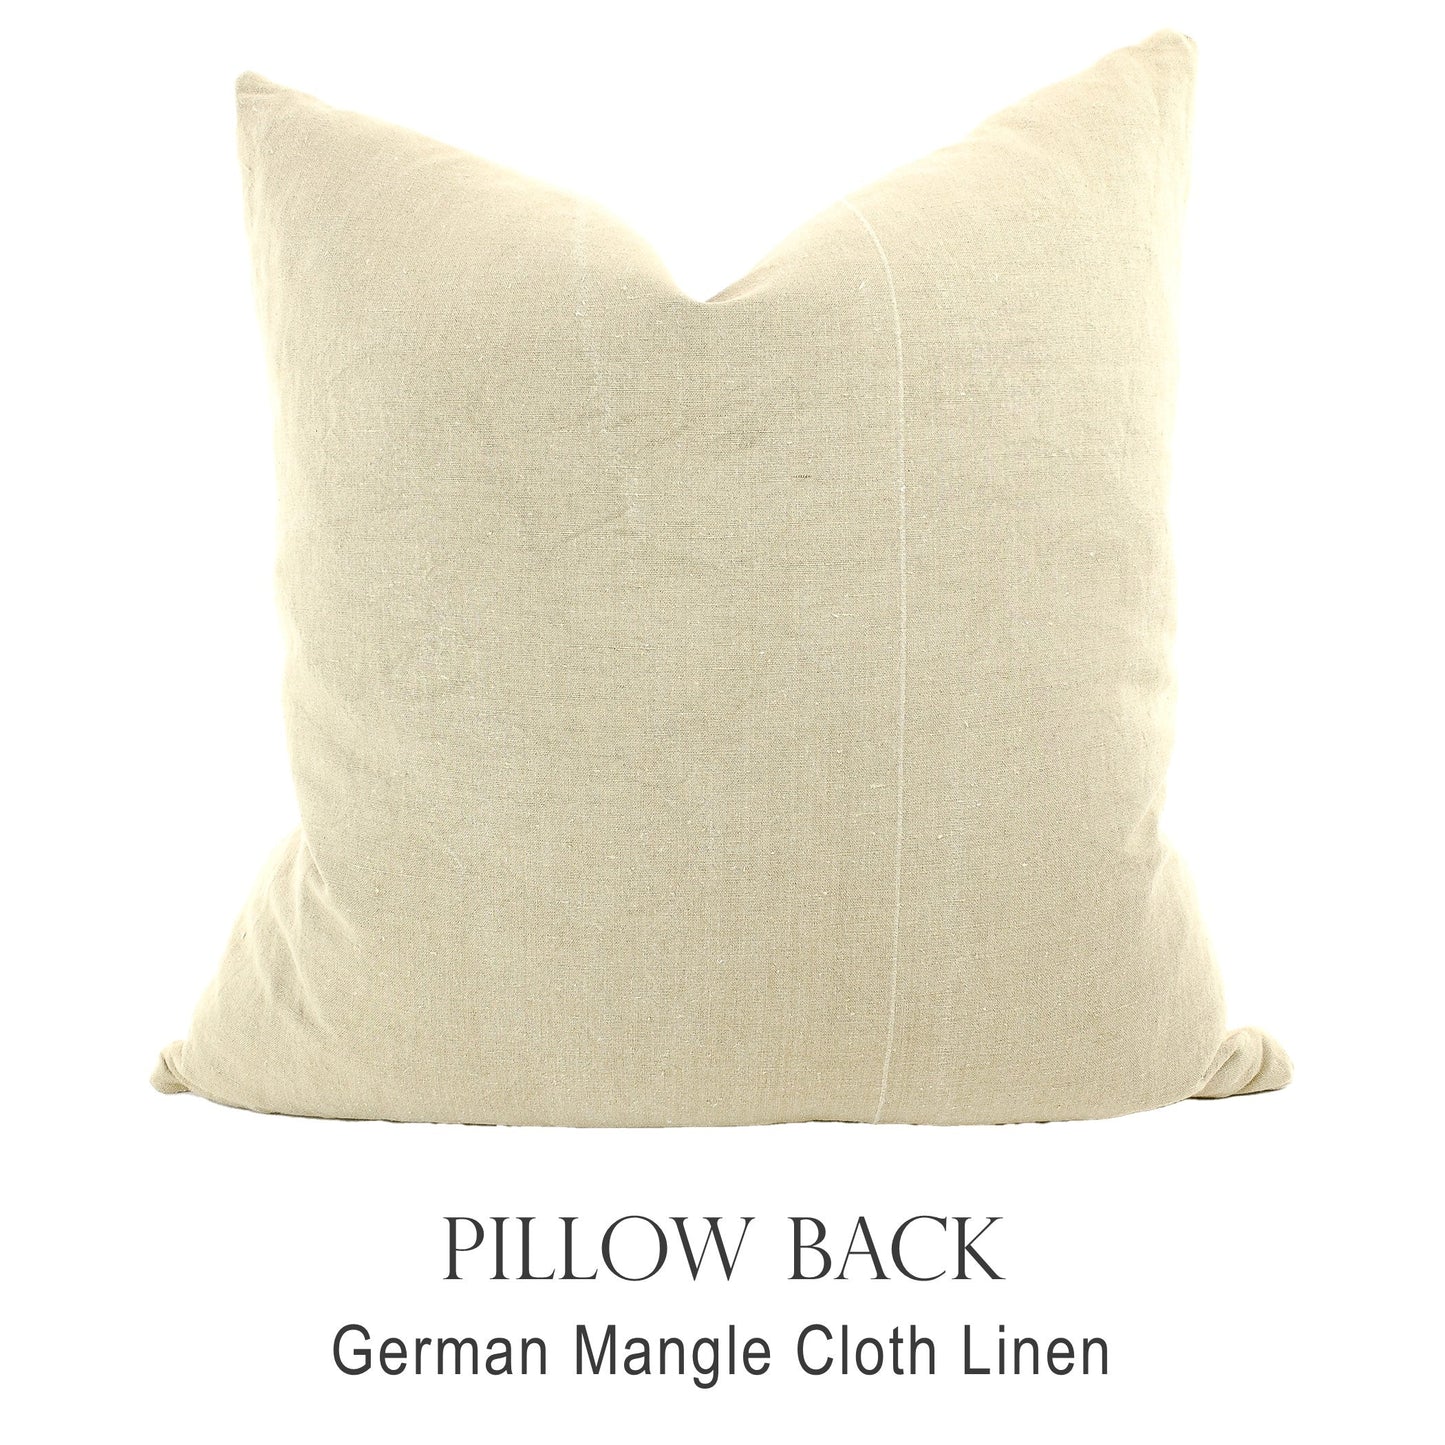 Back of pillow made from vintage German mangle cloth linen